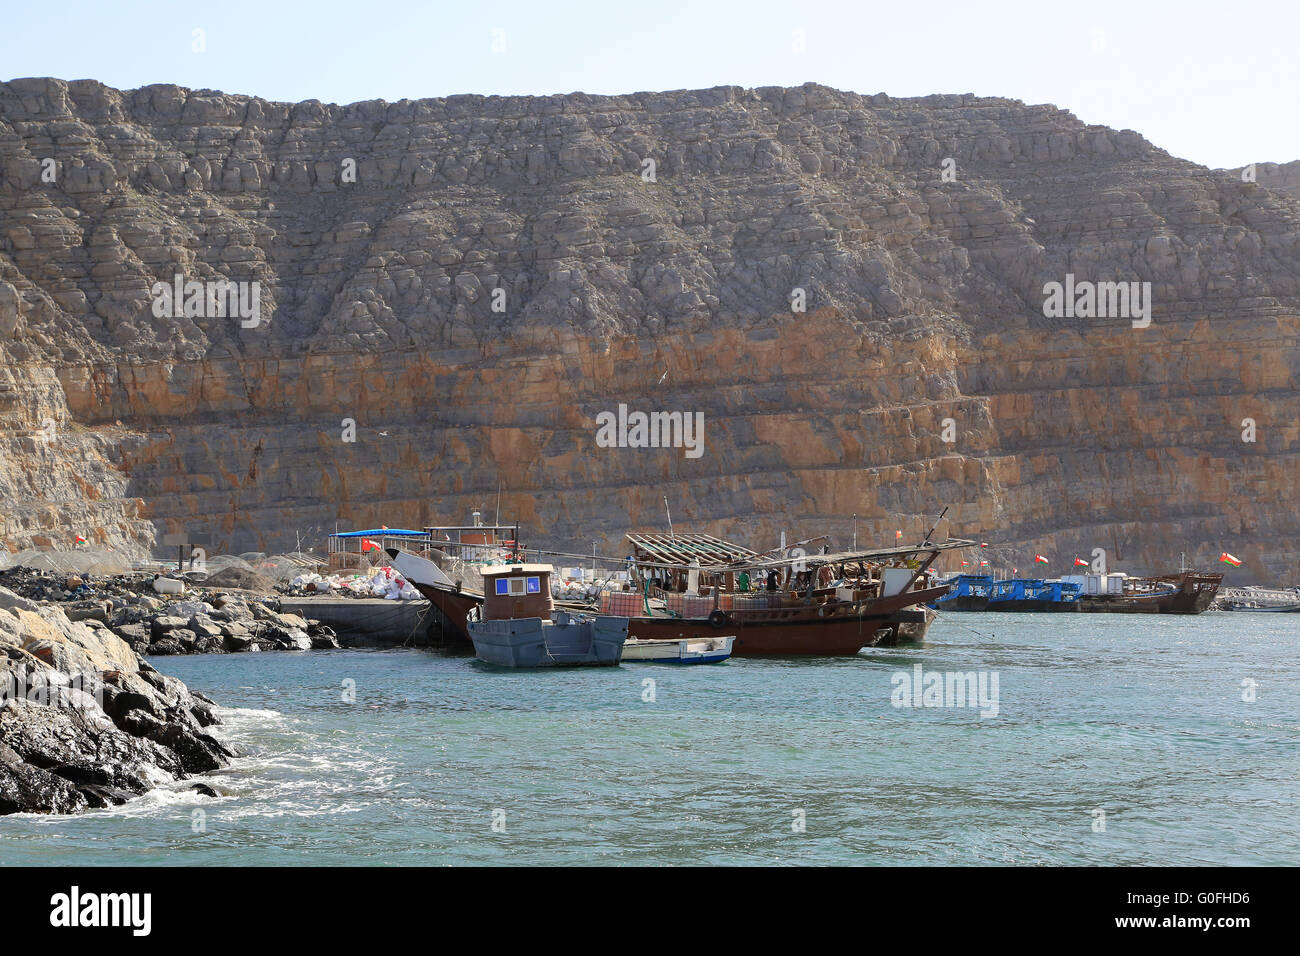 Oman, Port of Khasab with Dhows and boats Stock Photo